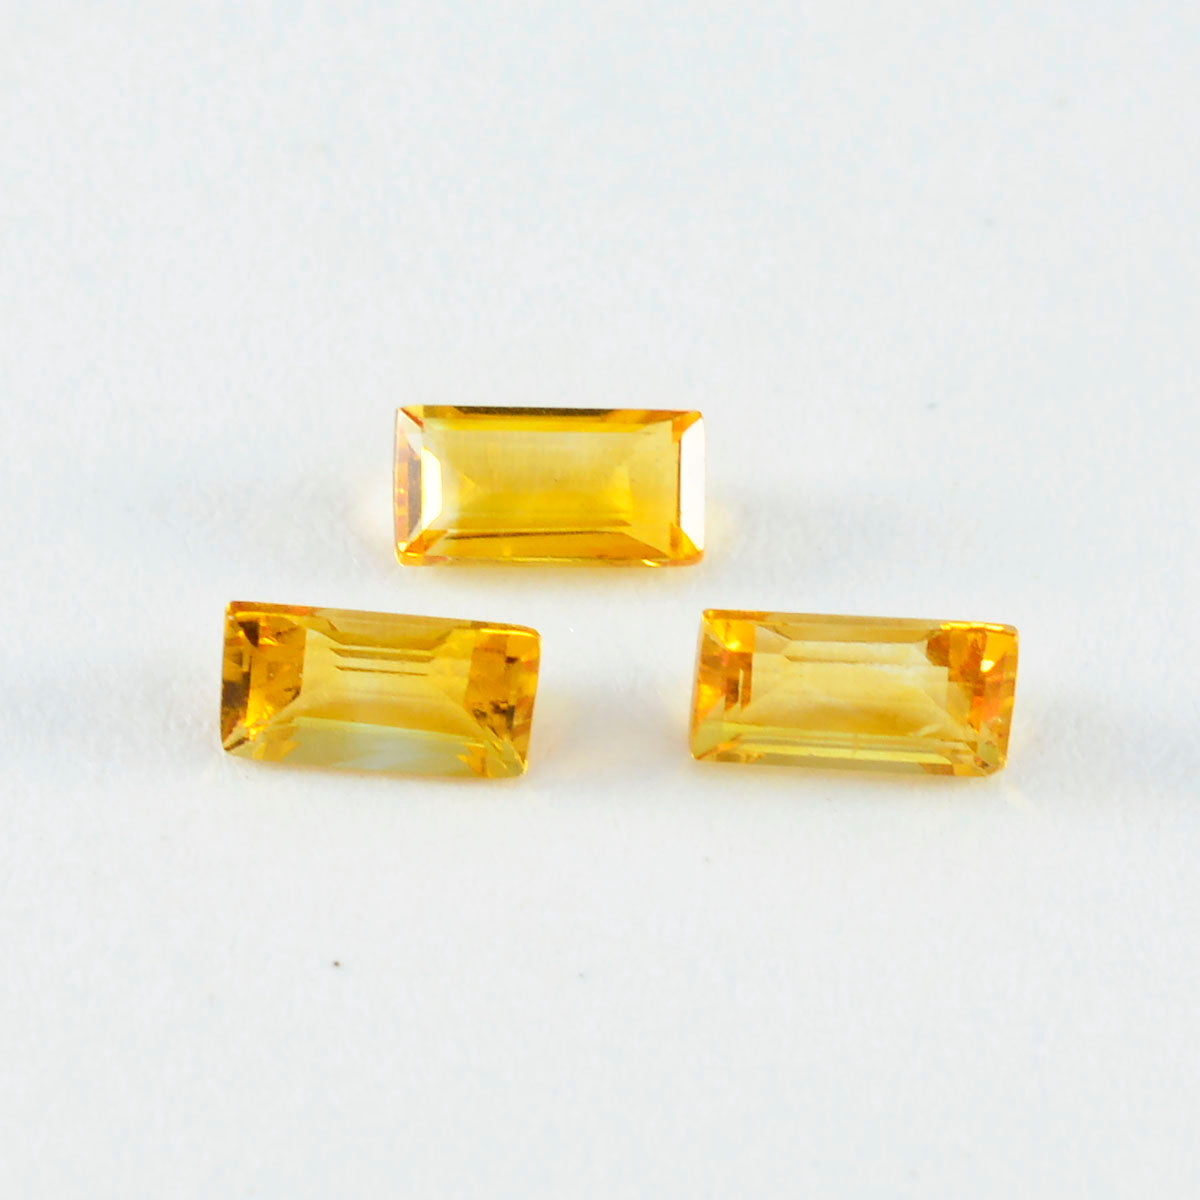 Riyogems 1PC Real Yellow Citrine Faceted 5x10 mm  Baguette Shape awesome Quality Loose Gem